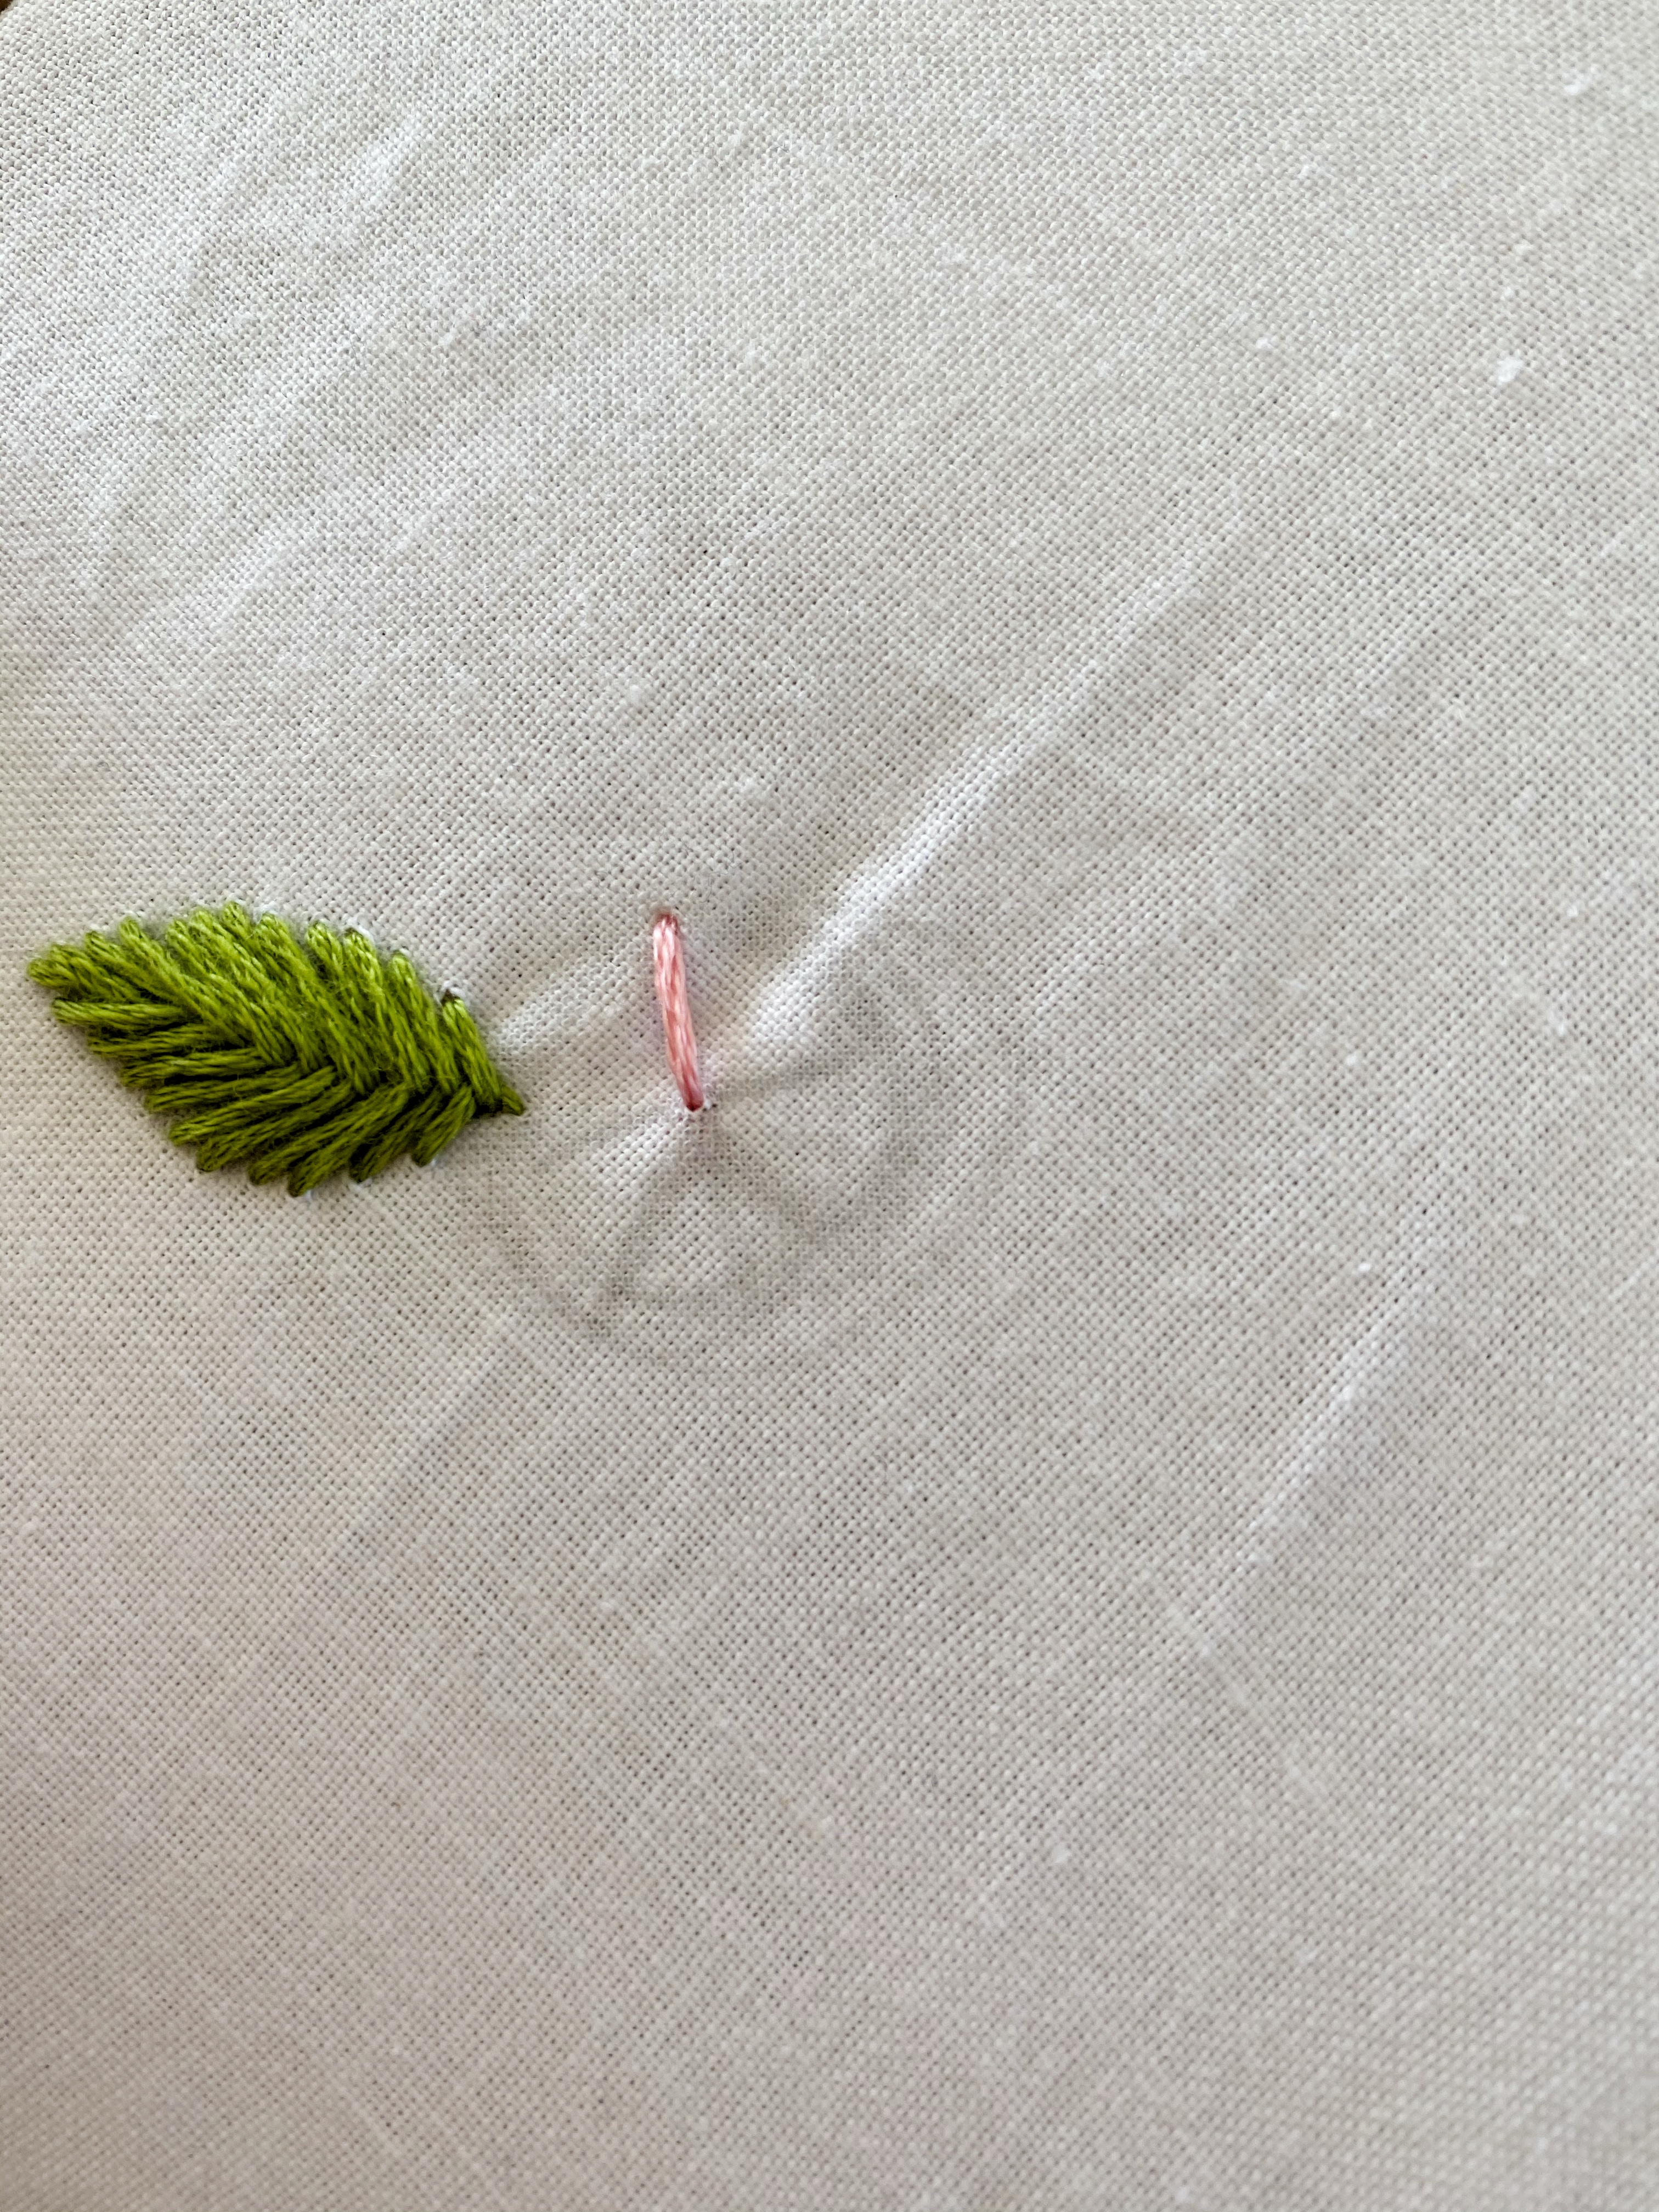 Hand Embroidery Rose, Step 2: add spokes